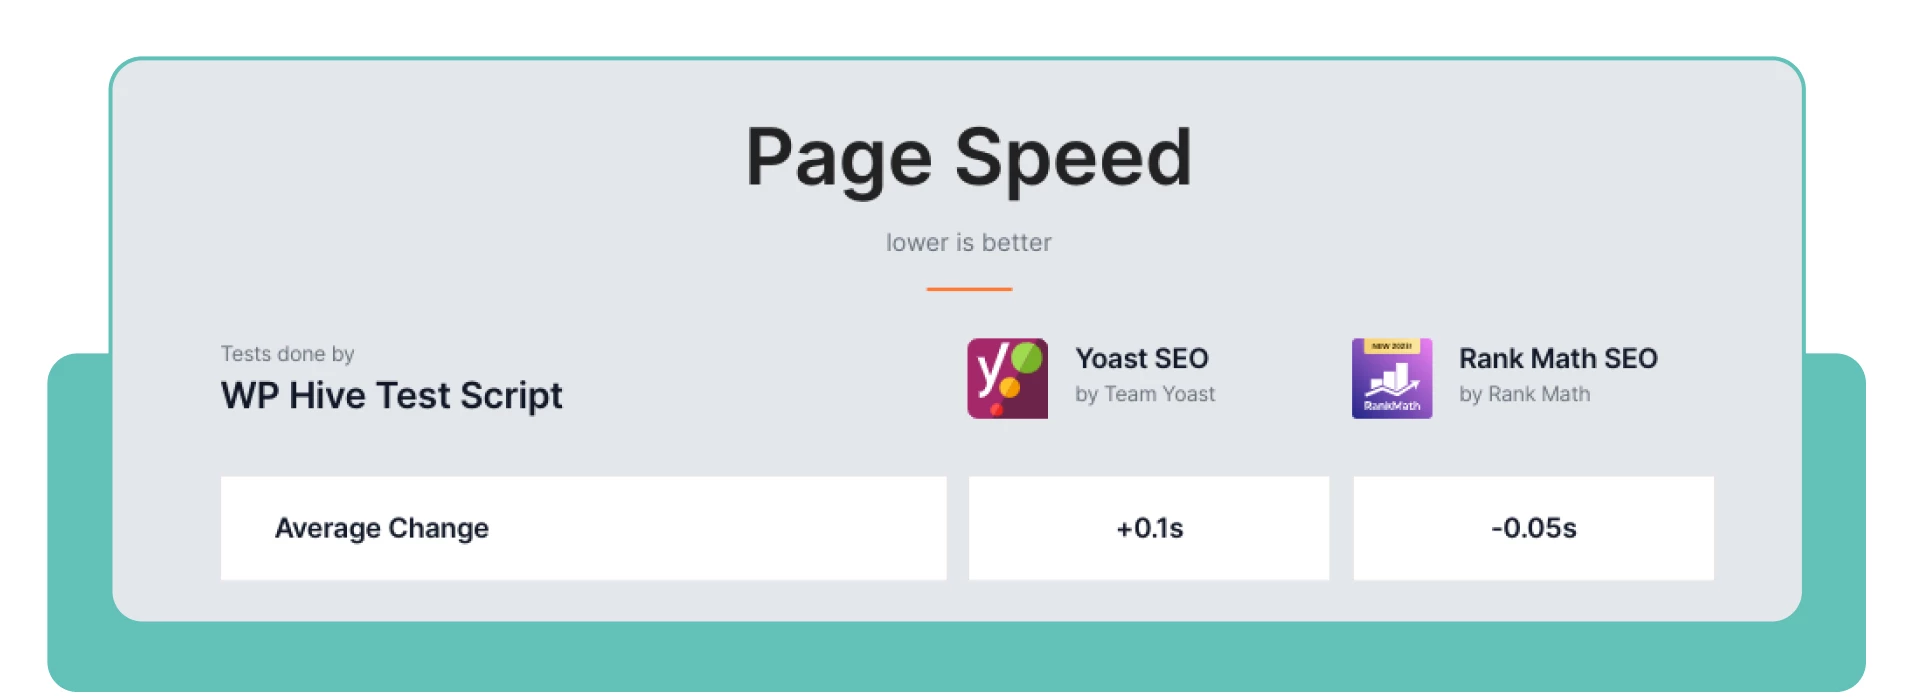 The winner is Rank Math. Let’s move on to the second comparison — page speed.